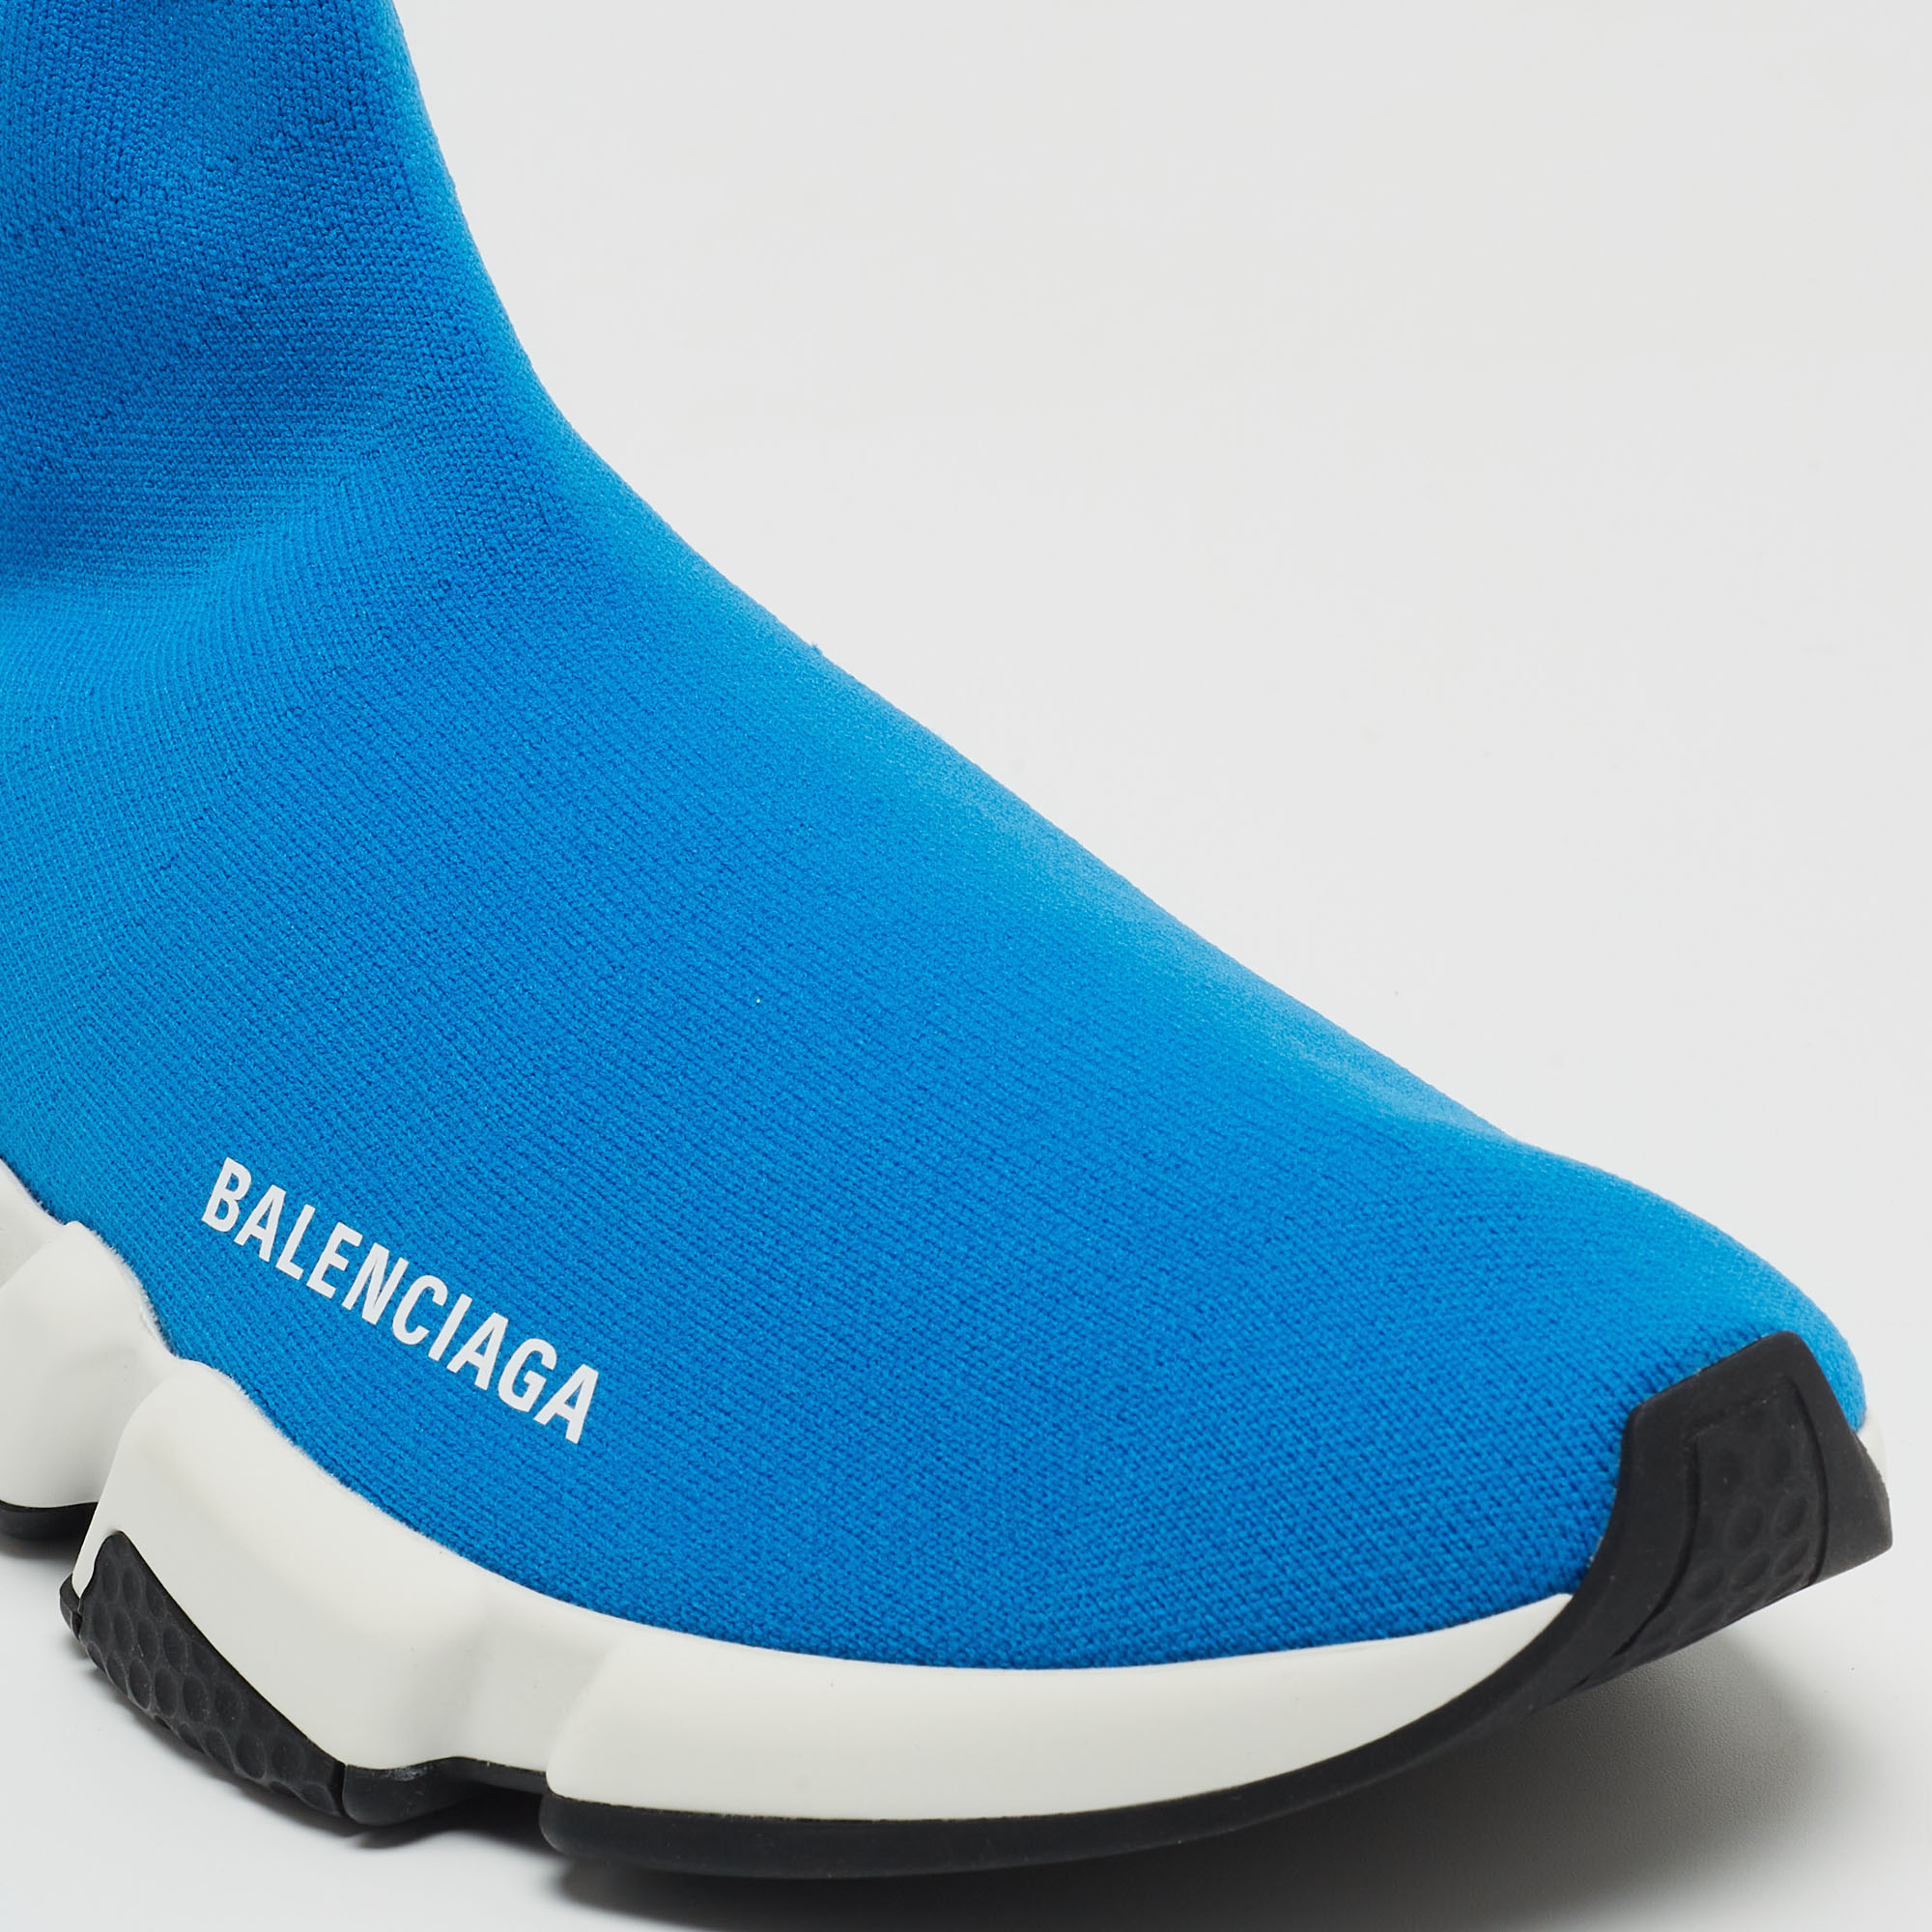 Balenciaga Blue Knit Fabric Speed Trainer Sneakers Size 41